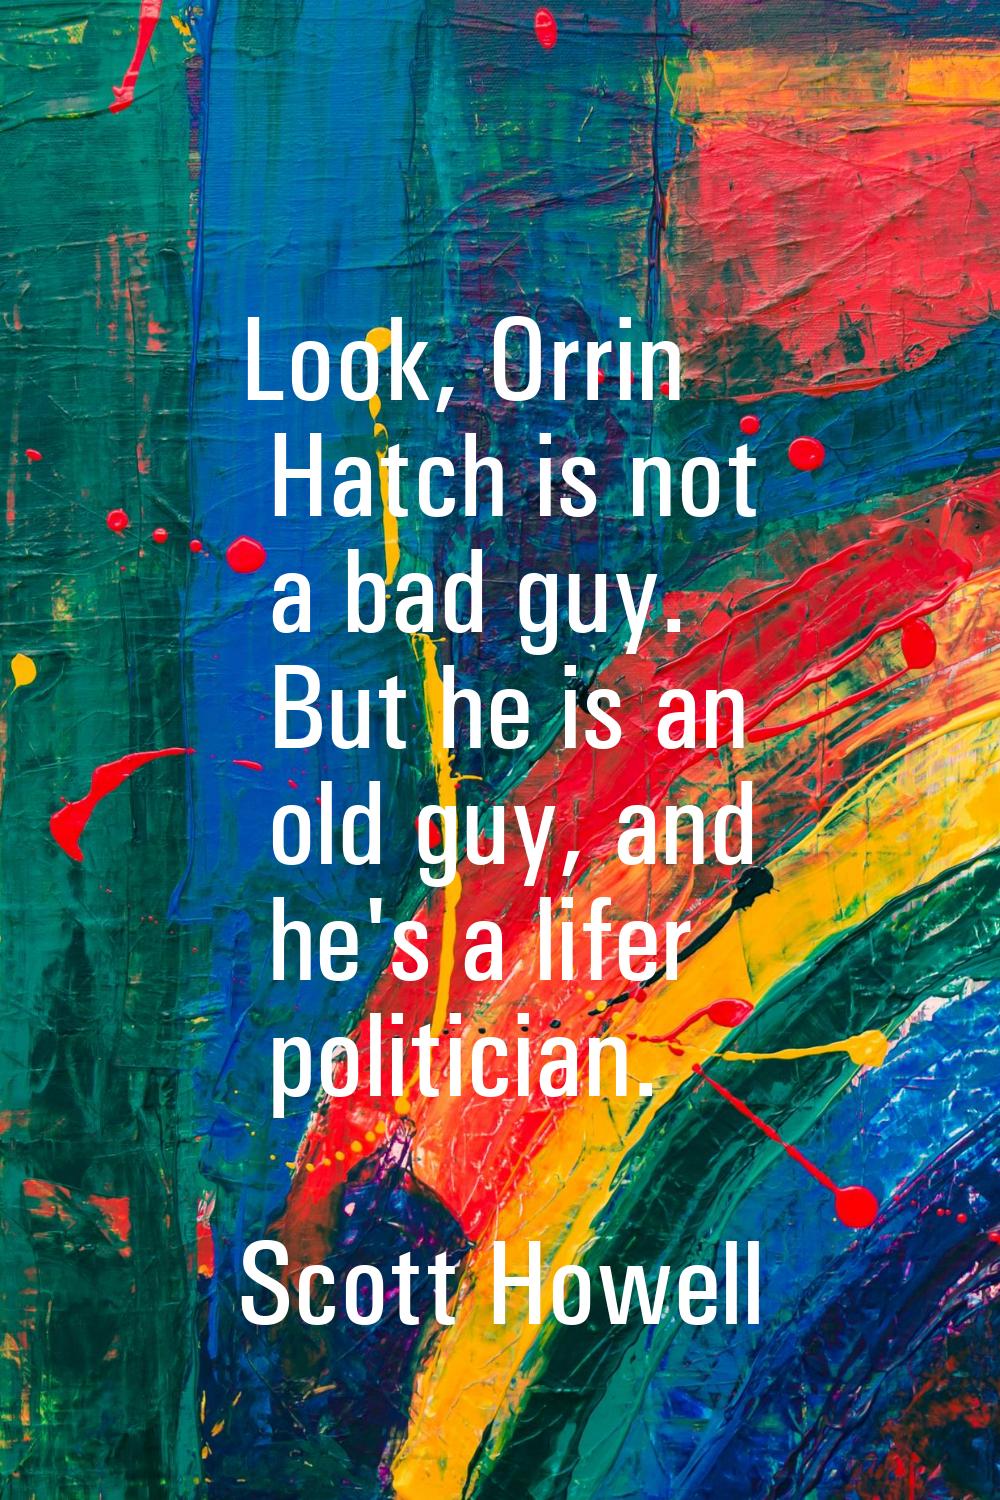 Look, Orrin Hatch is not a bad guy. But he is an old guy, and he's a lifer politician.